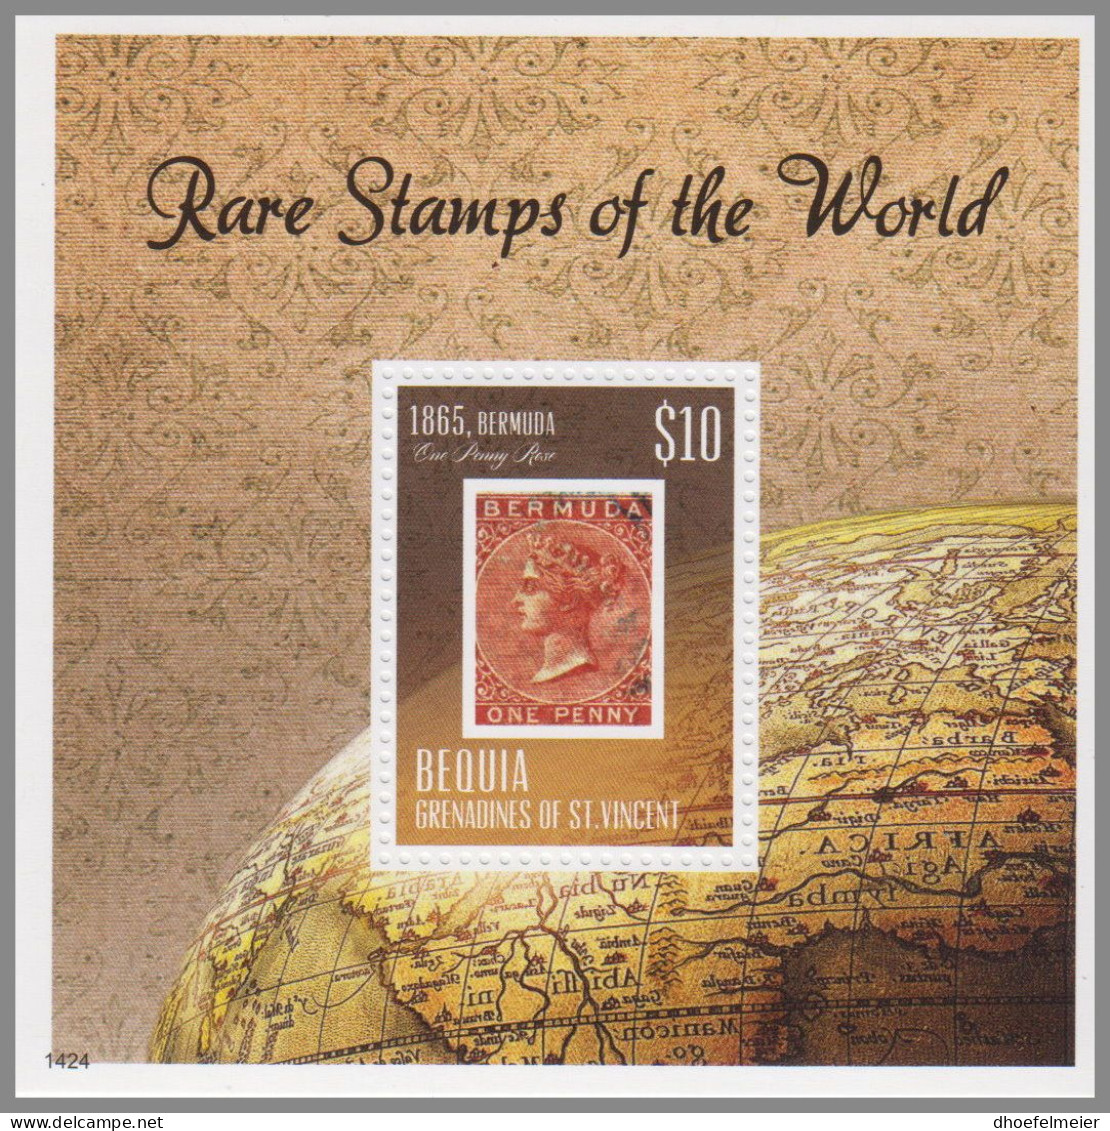 BEQUIA GRENADINES 2014 MNH Rare Stamps Of The World 1424 S/S – OFFICIAL ISSUE – DHQ49610 - Sellos Sobre Sellos